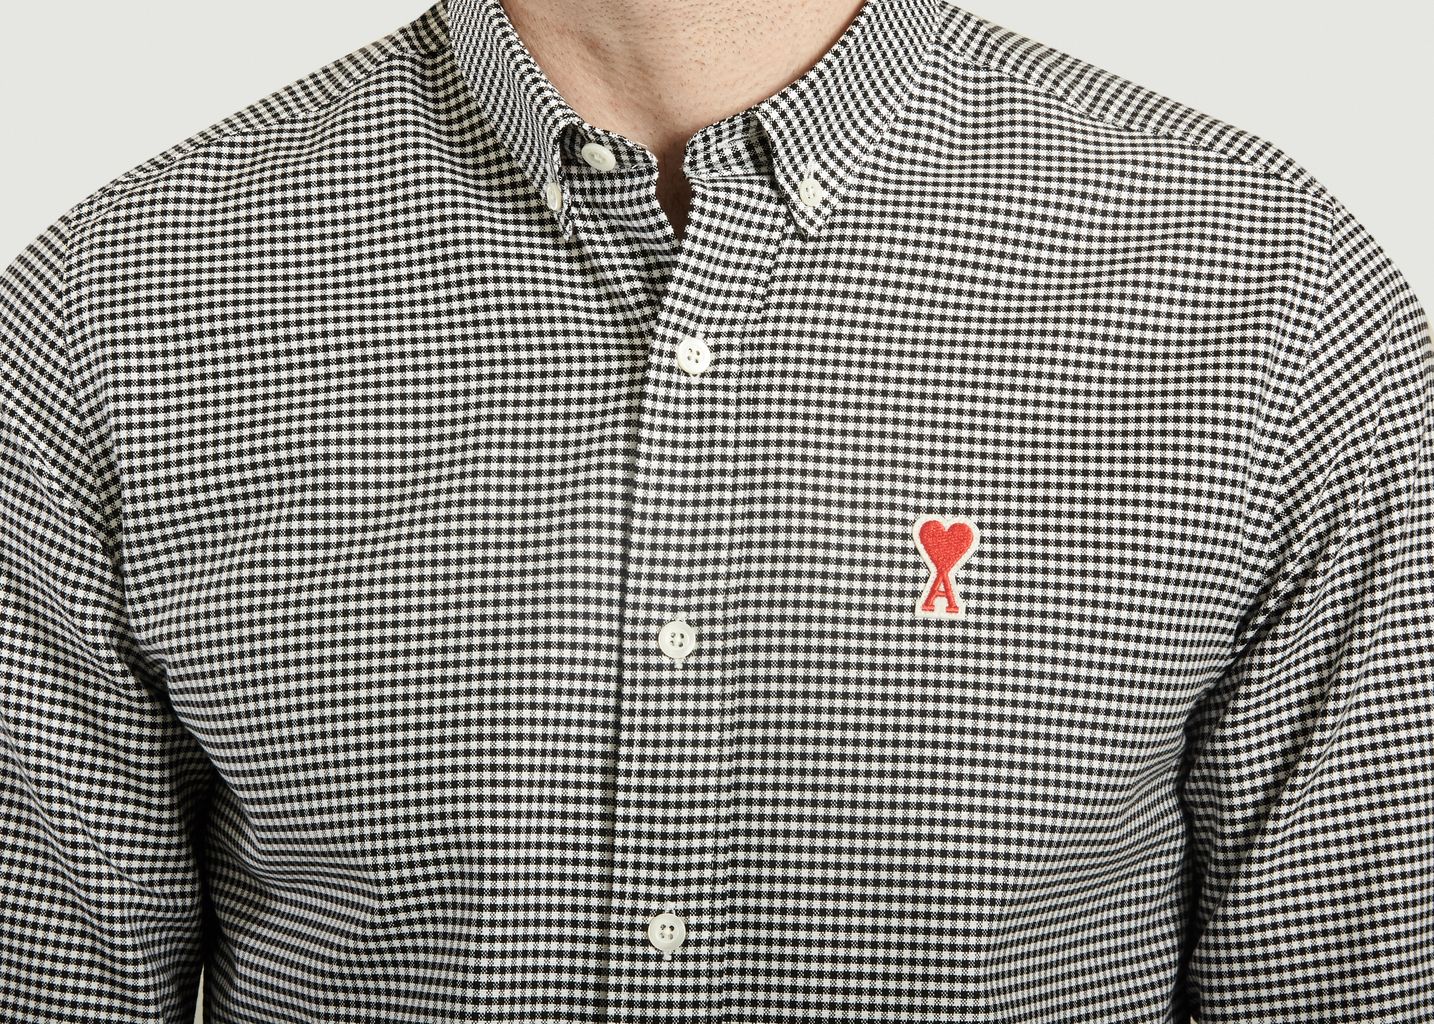 Oxford Shirt With Logo And American Collar - AMI Paris